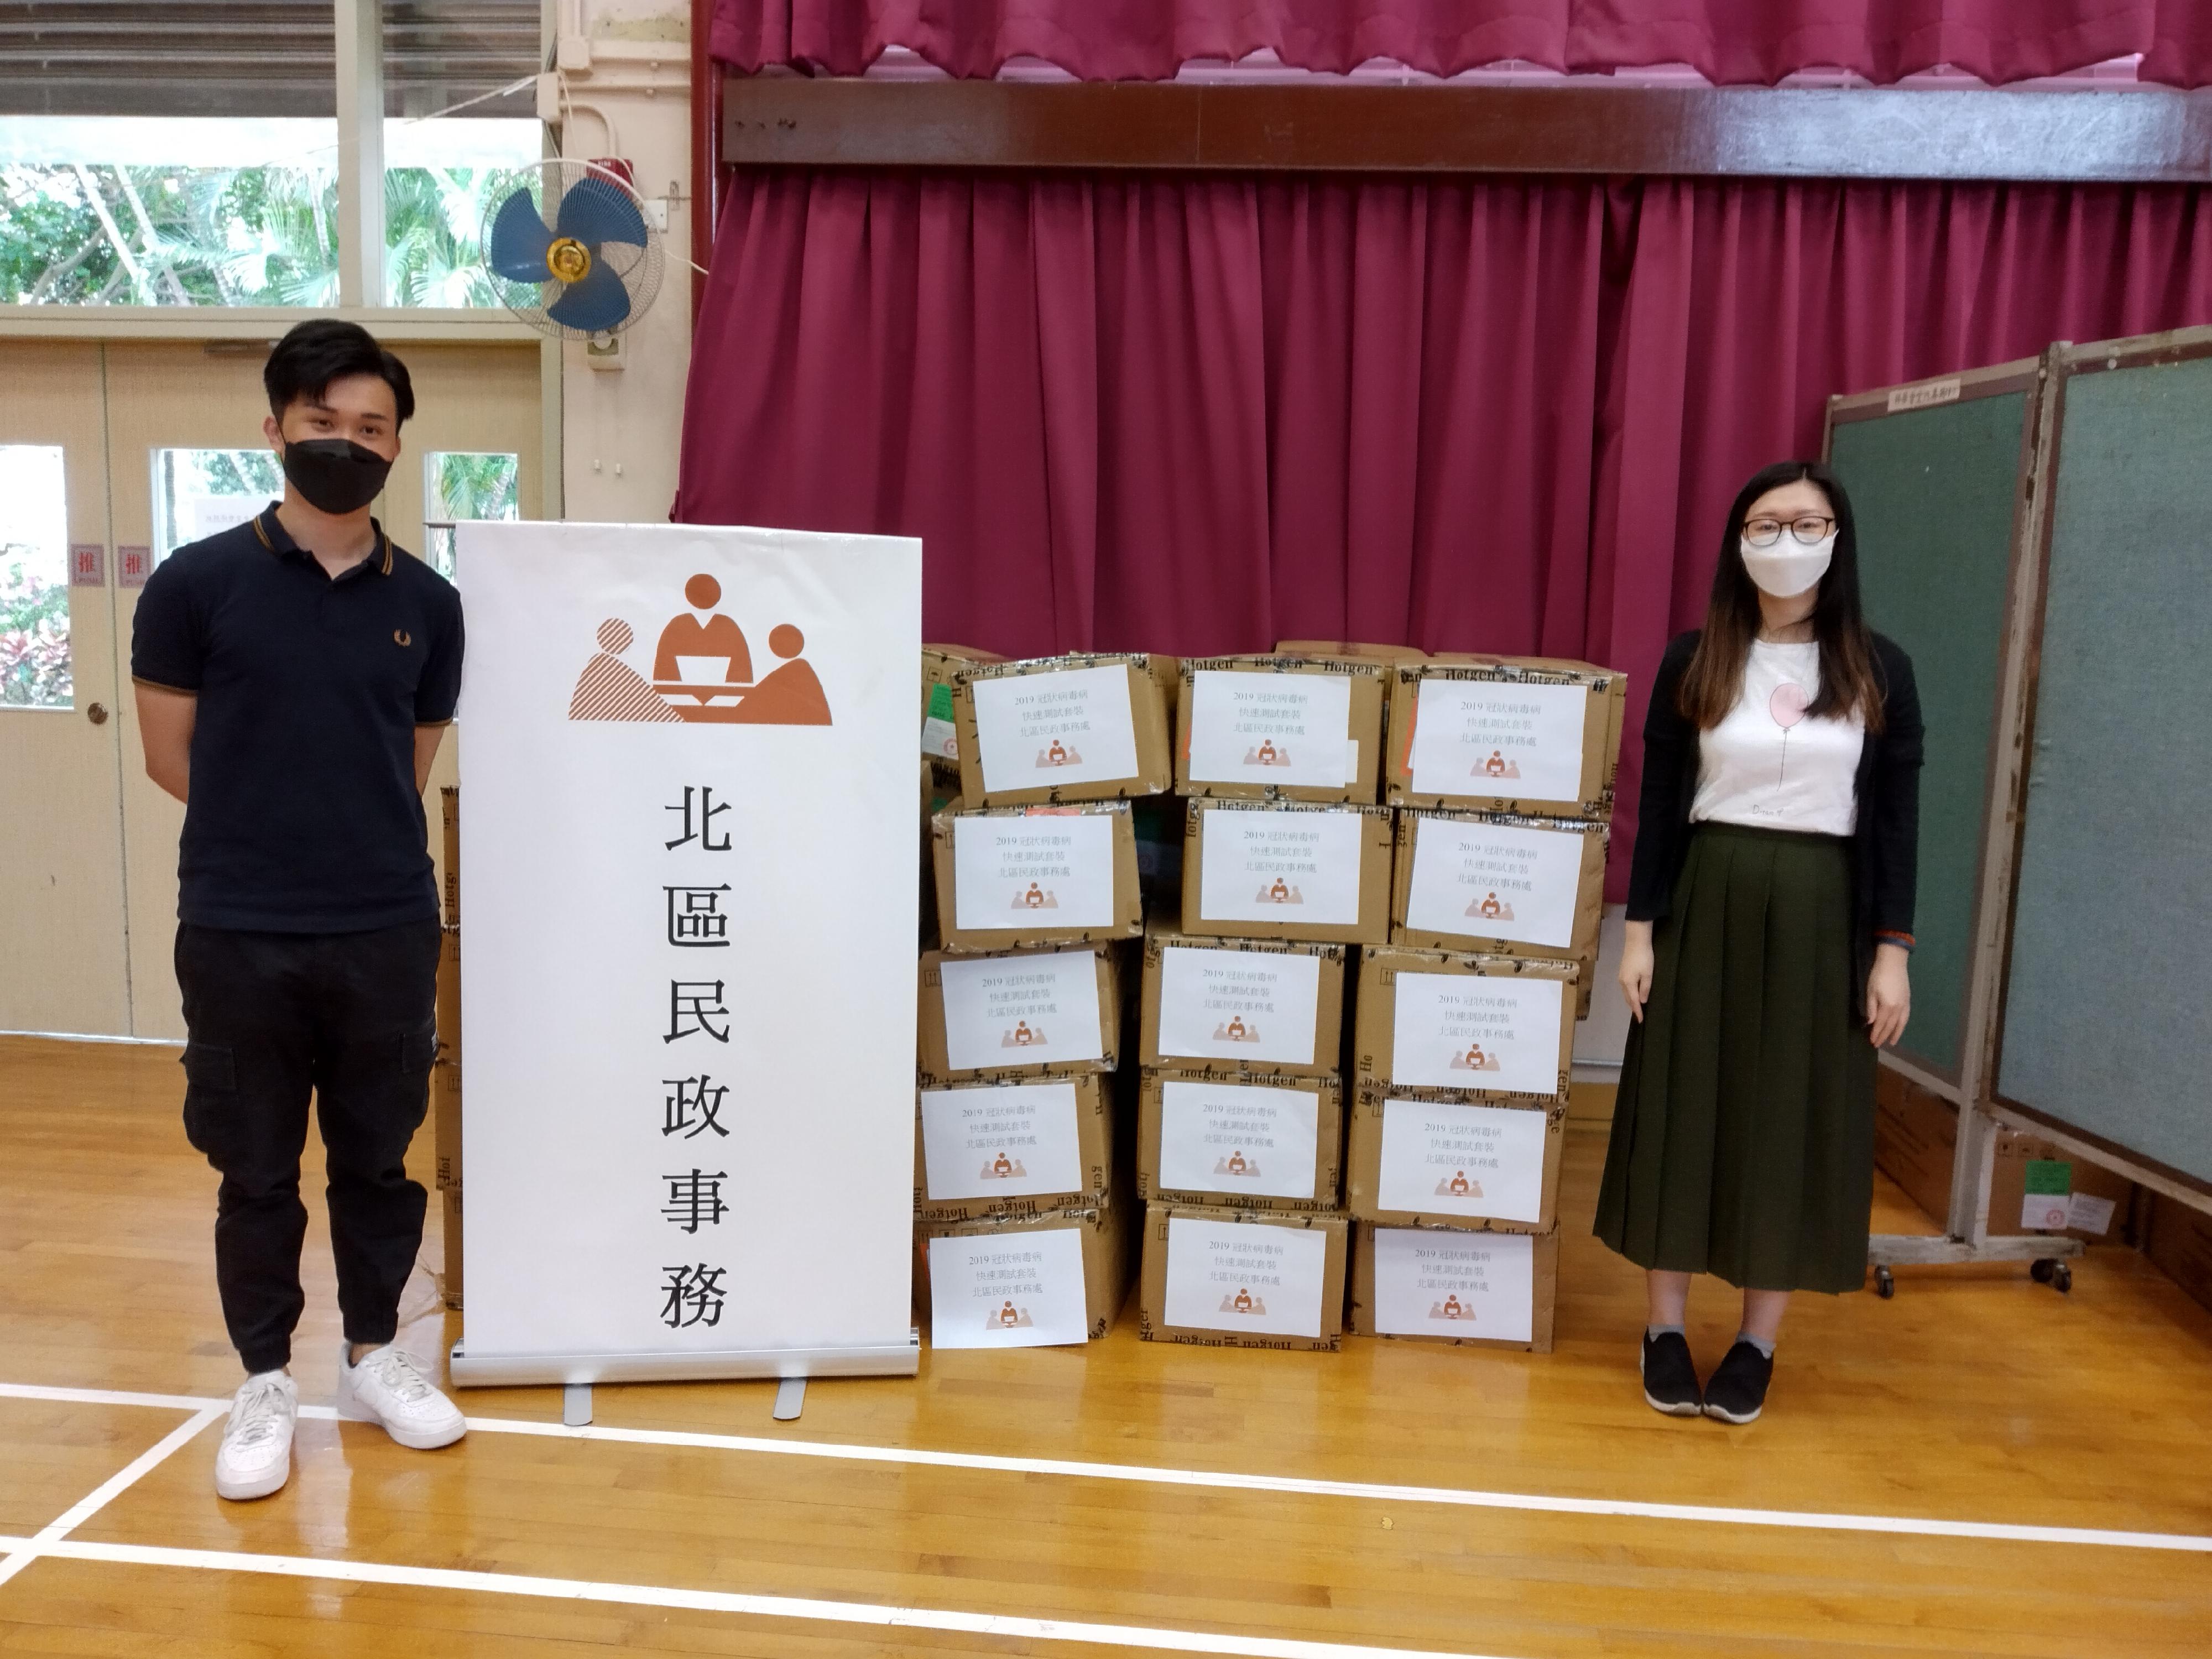 The North District Office today (March 21) distributed COVID-19 rapid test kits to households, cleansing workers and property management staff living and working in Ching Ho Estate for voluntary testing through the Property Service Management Offices of the Housing Department.